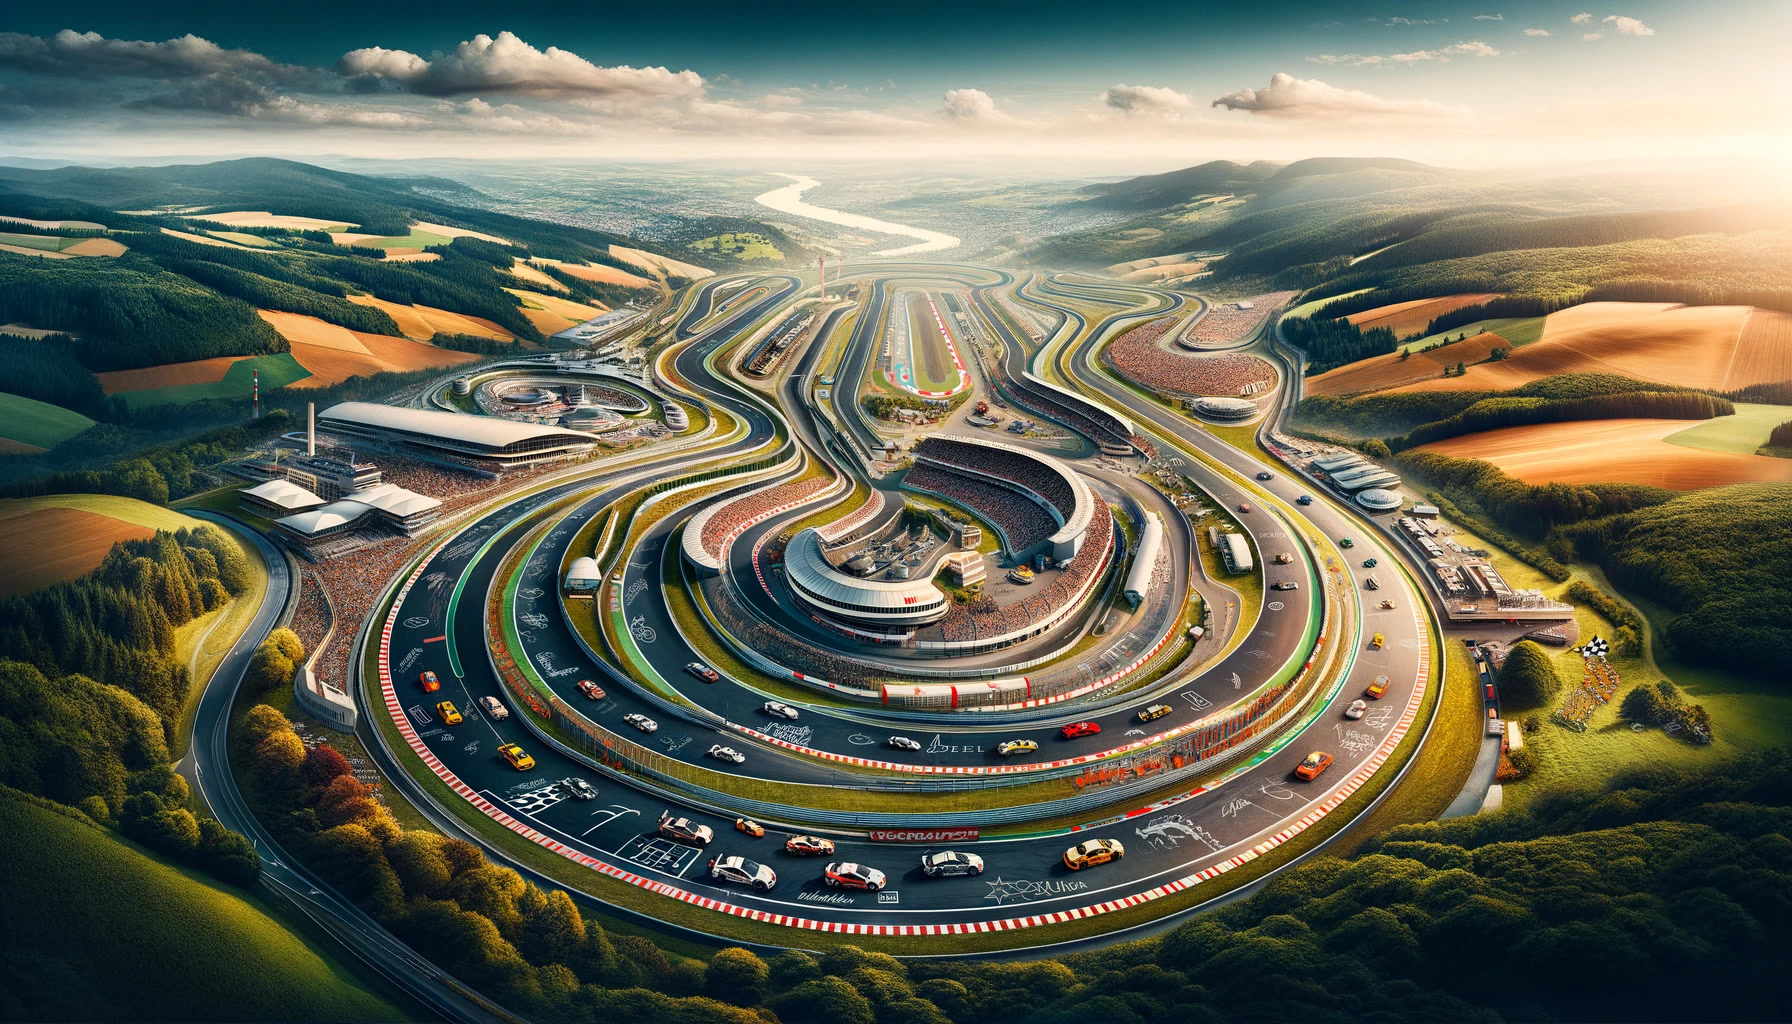 Scenic View of Iconic Race Tracks and Locations associated with the AMG Driving Academy